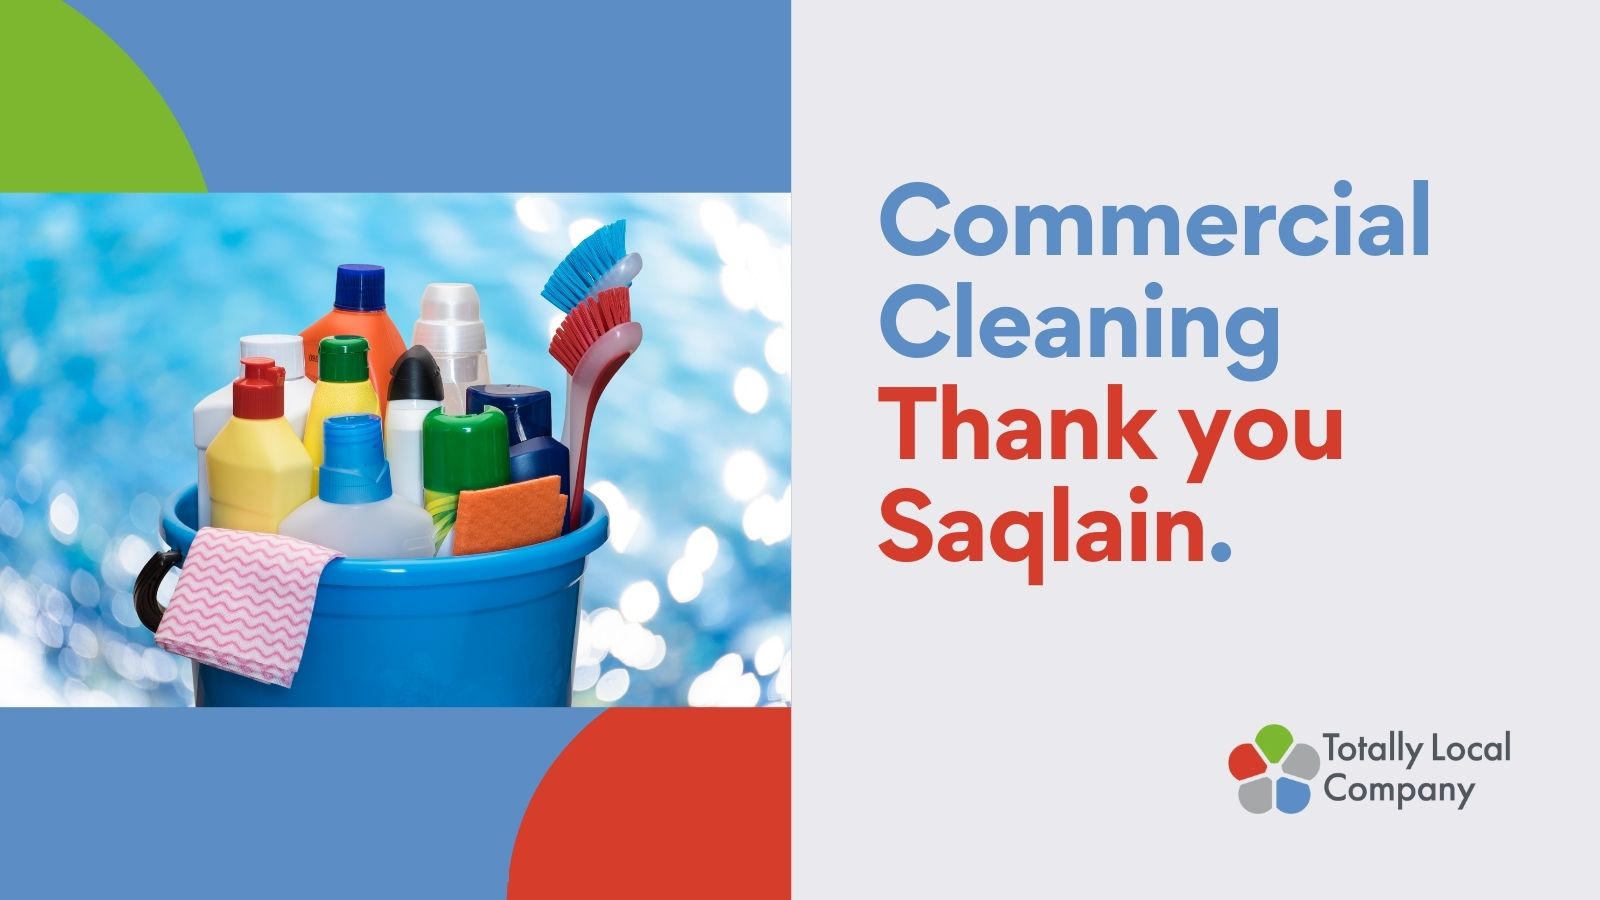 wording - commercial cleaning - thank you Saqlain, image of cleaning products in a bucket